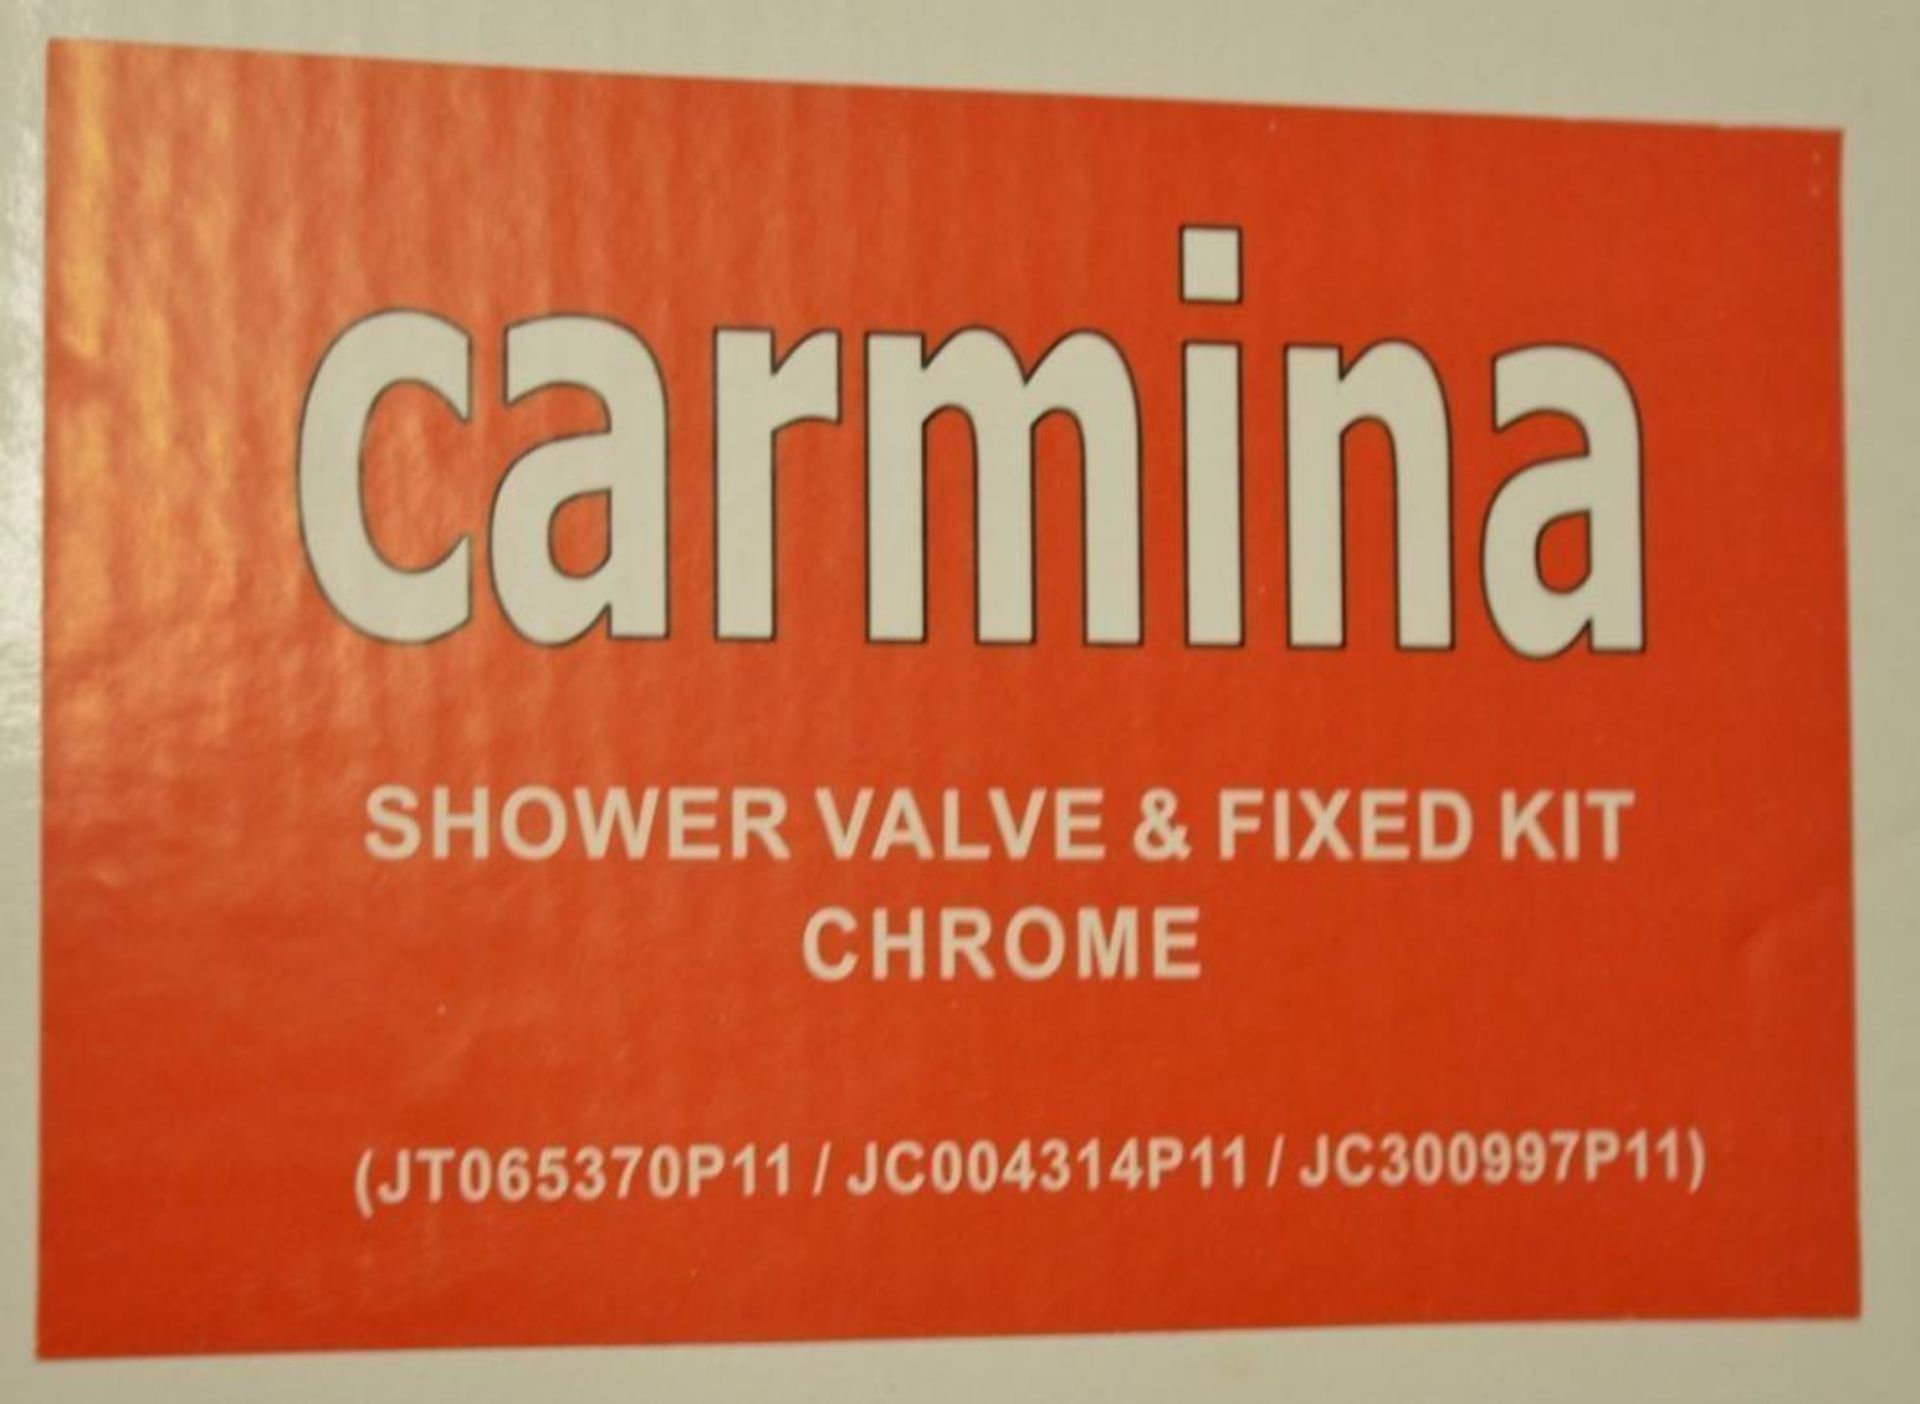 1 x Carmina Shower Valve Kit - Contains Chrome Shower Head, Fixed Arm and Manual Control - Brass Con - Image 10 of 10